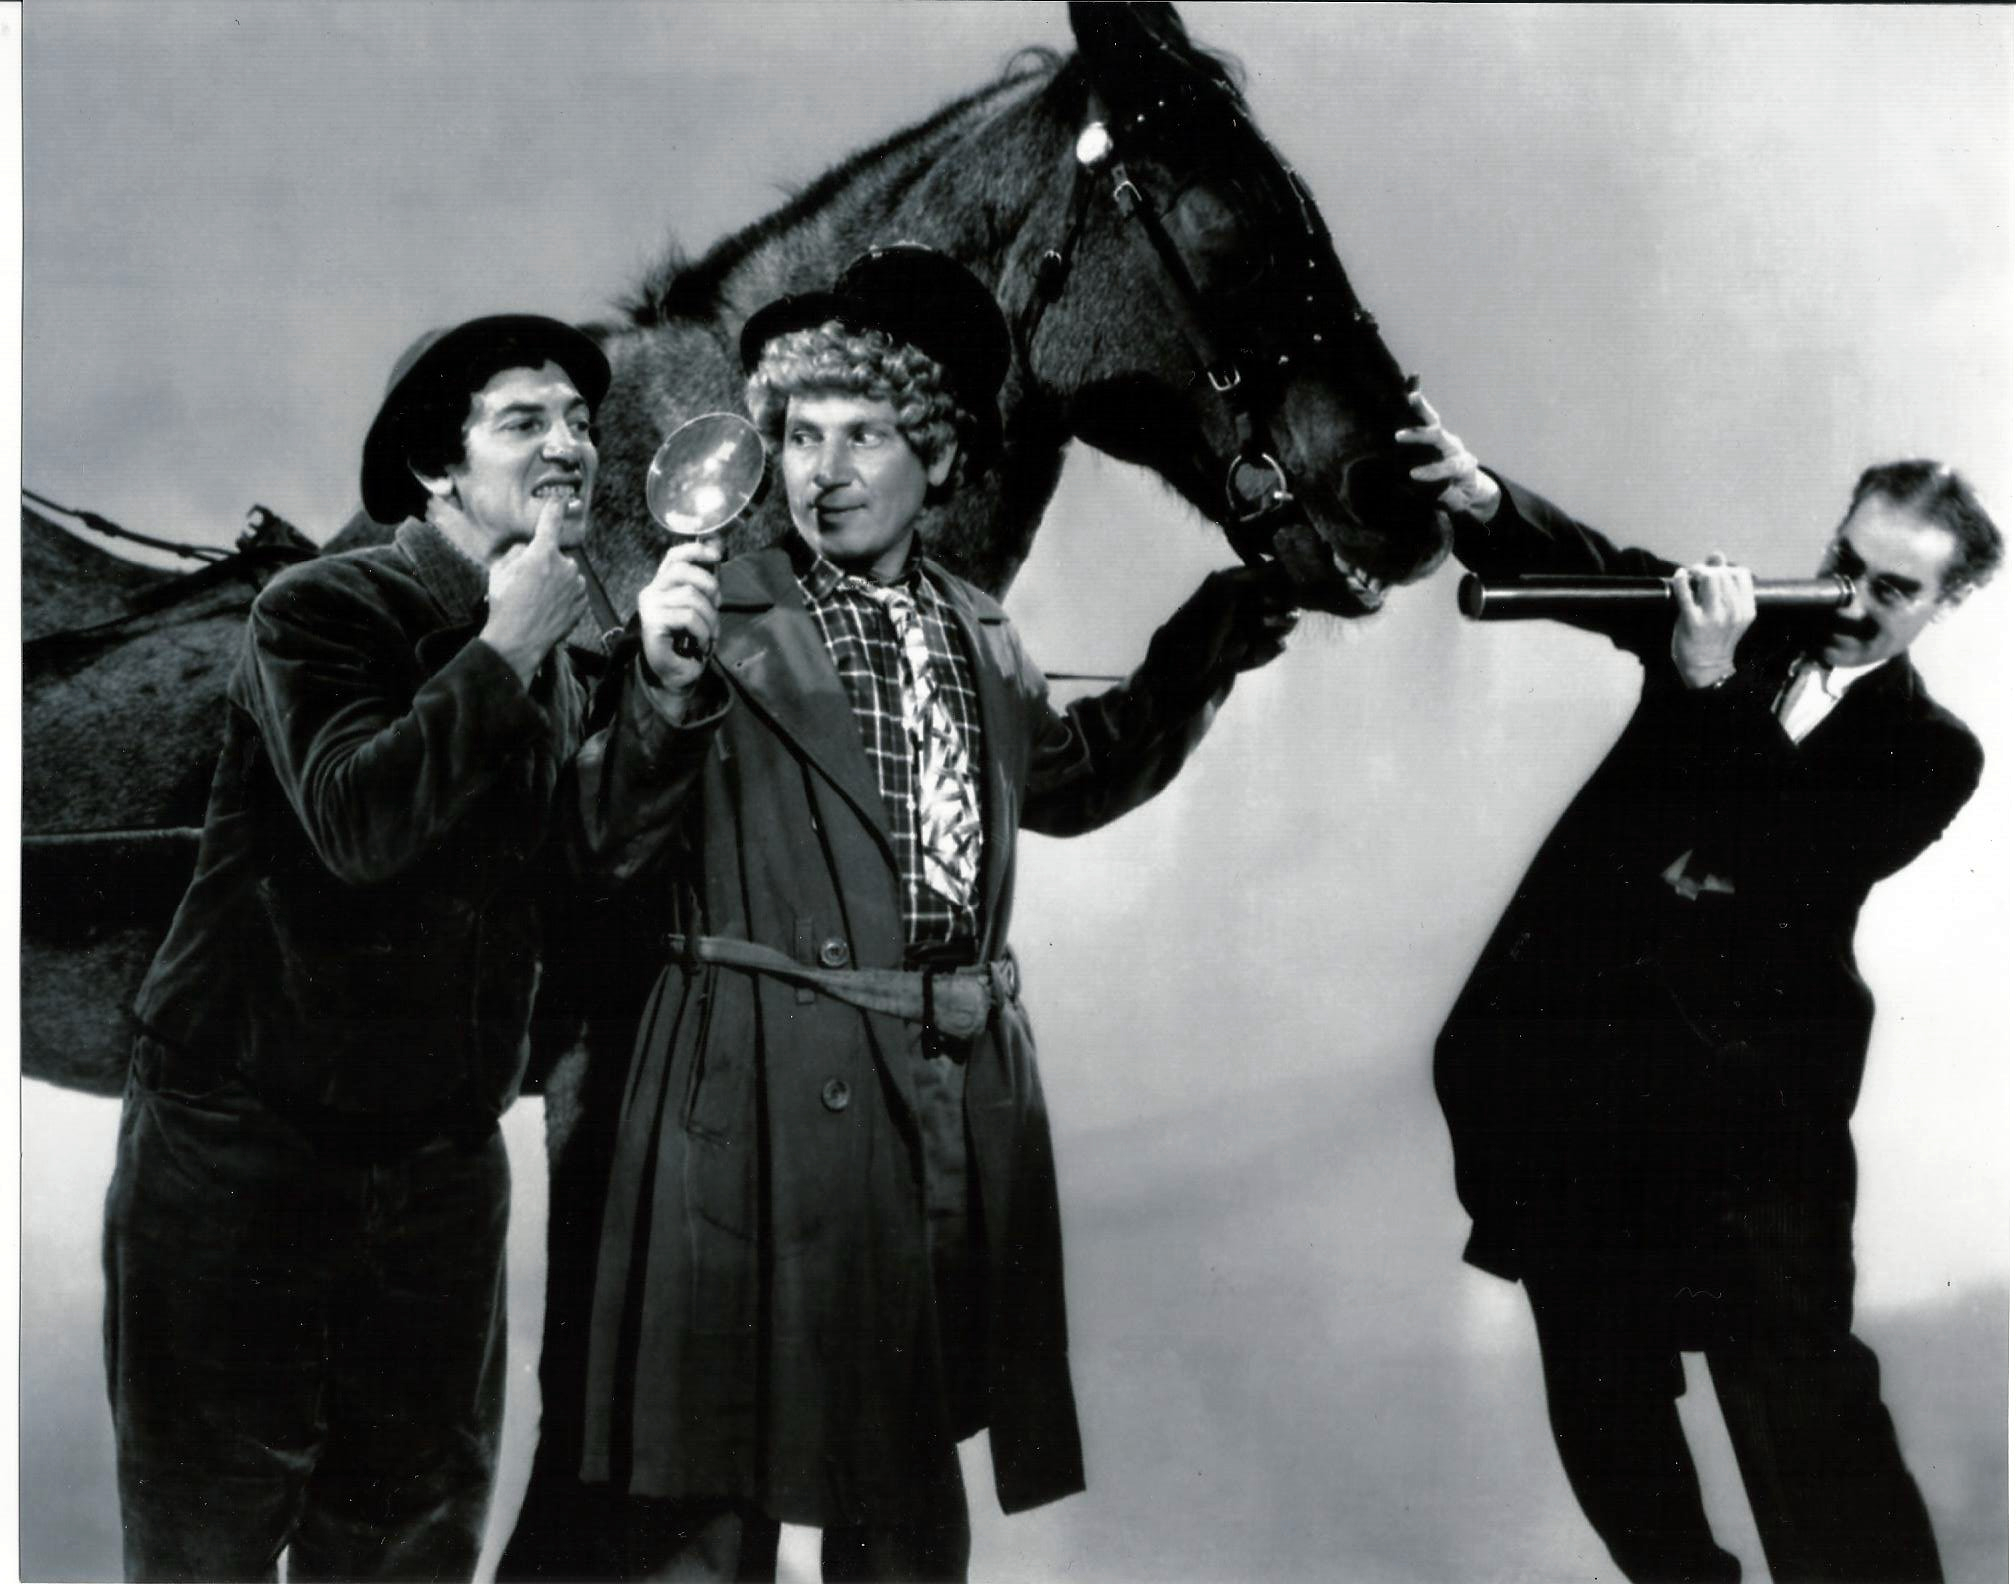 Groucho Marx, Chico Marx and Harpo Marx in A Day at the Races (1937)